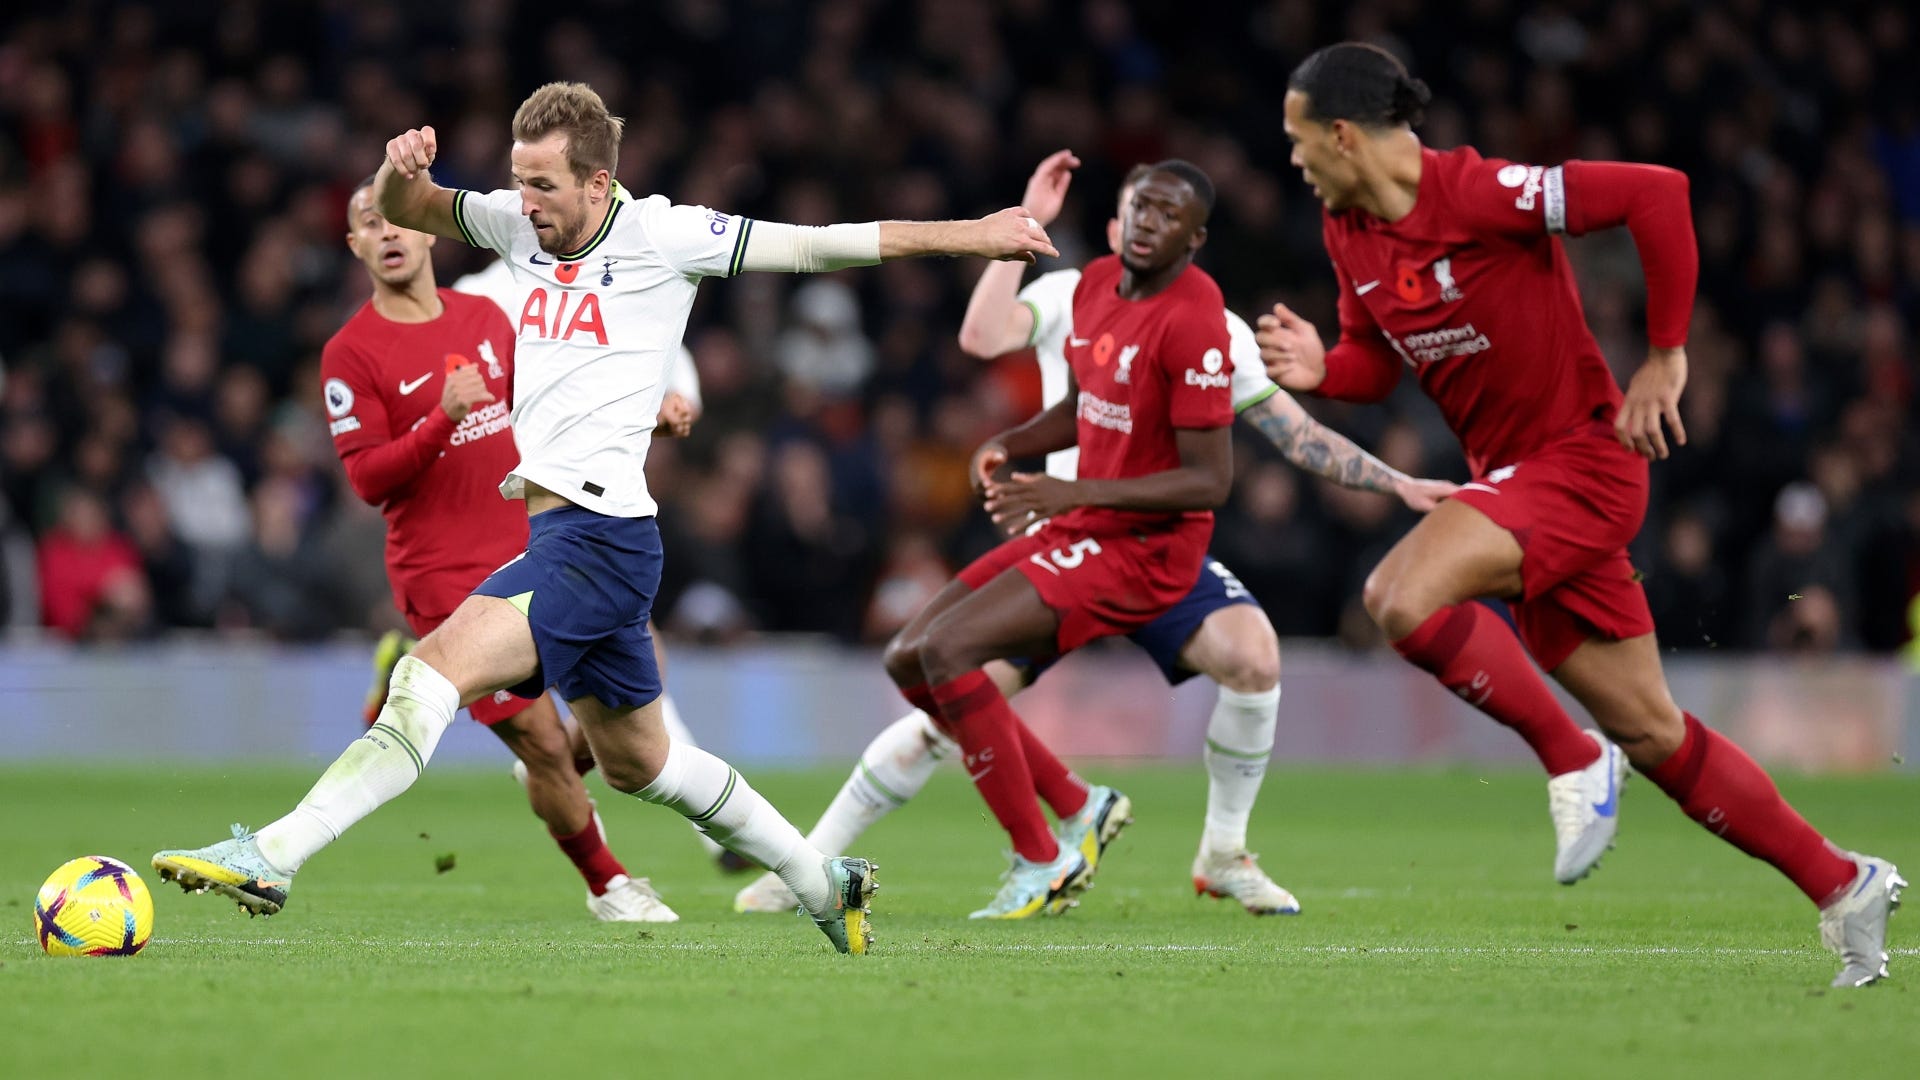 Liverpool vs Tottenham Where to watch the match online, live stream, TV channels and kick-off time Goal UK